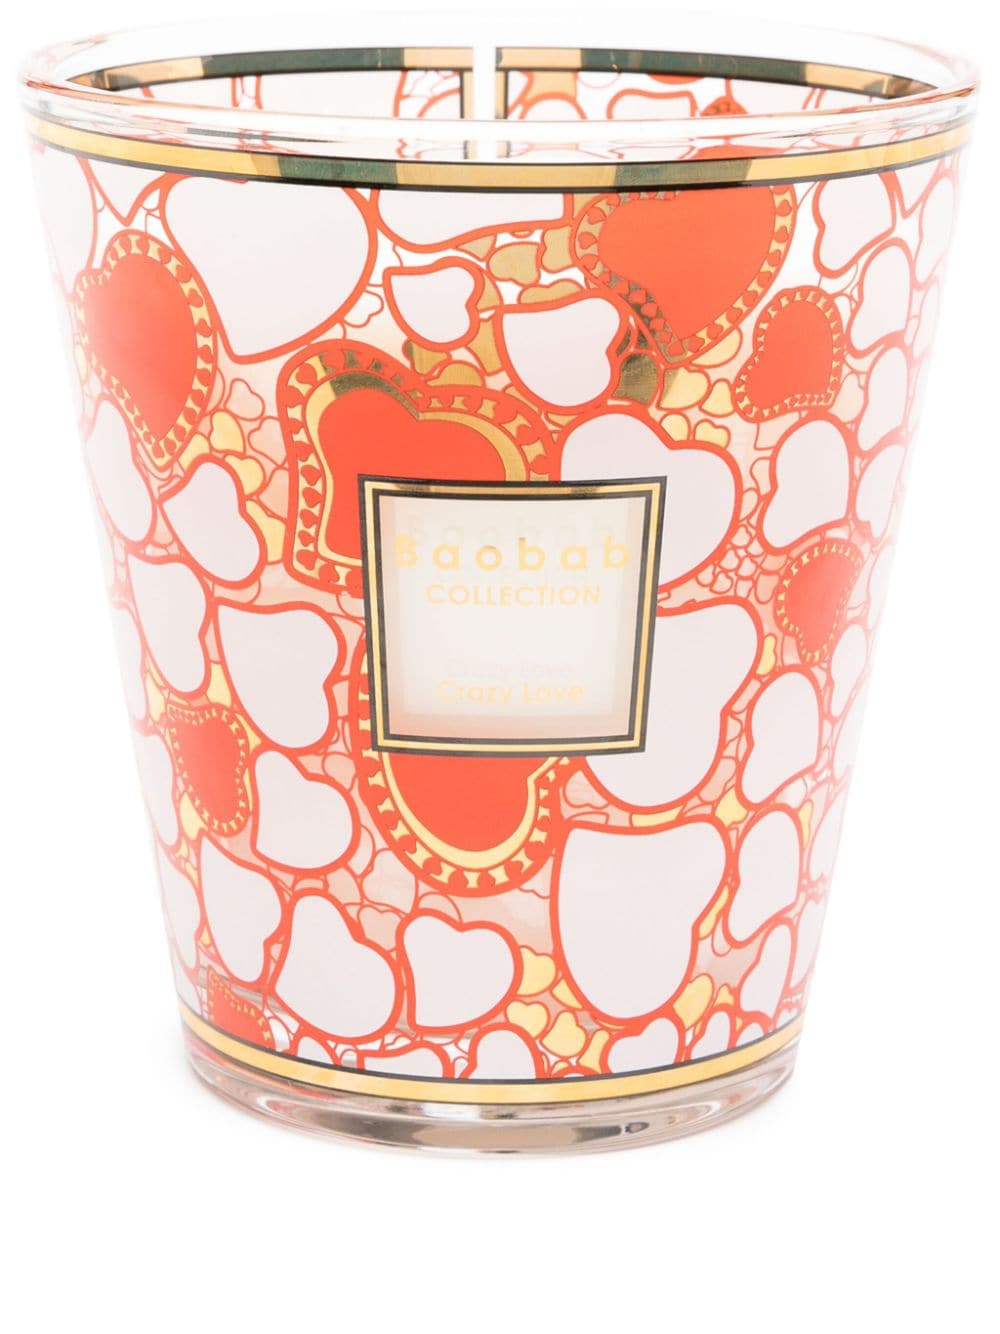 Image 1 of Baobab Collection Crazy Love Max 16 scented candle (1.1kg)